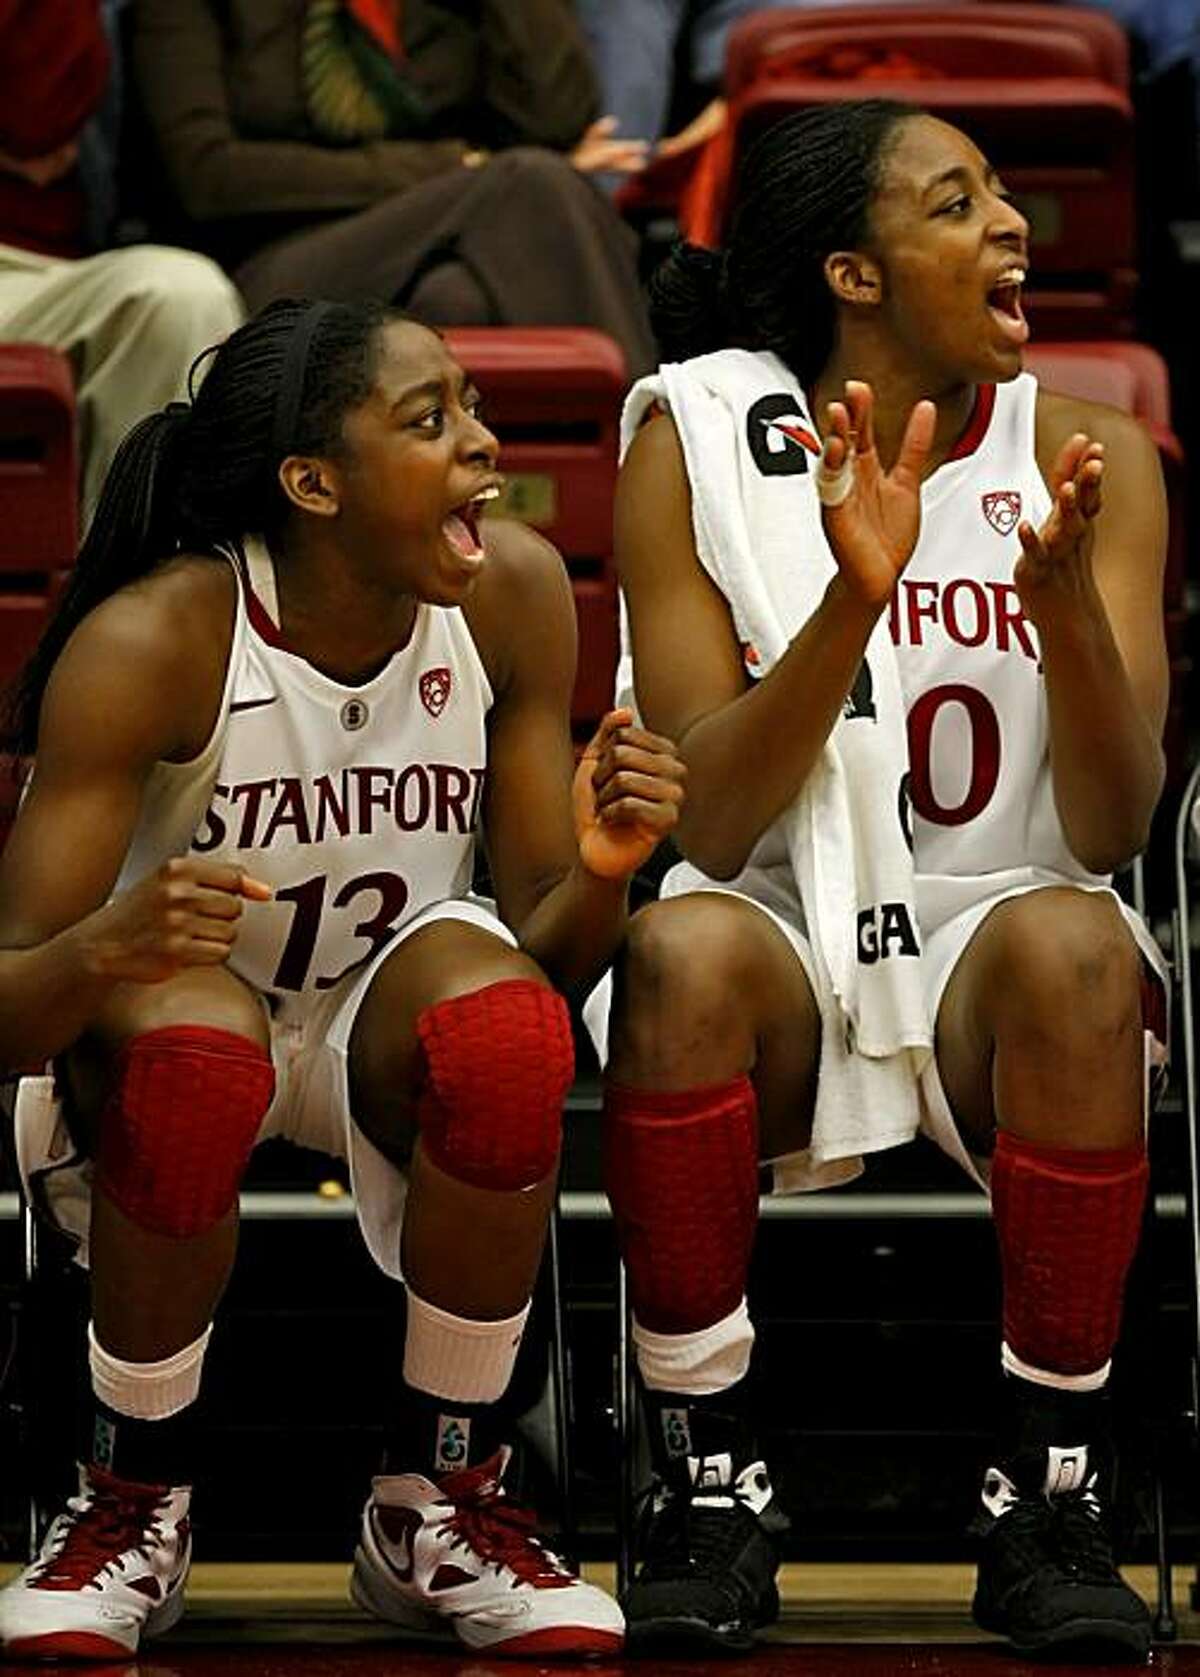 Stanford Women Cardinal Chiney and Nnemkadi Ogwumike cheer for their team against the Fresno State Bulldogs, Sunday Dec. 12, 2010, in Stanford, Calif. The sisters were the top scorers of the game with Chiney total 18 points and Nnemkadi 17, in the game.